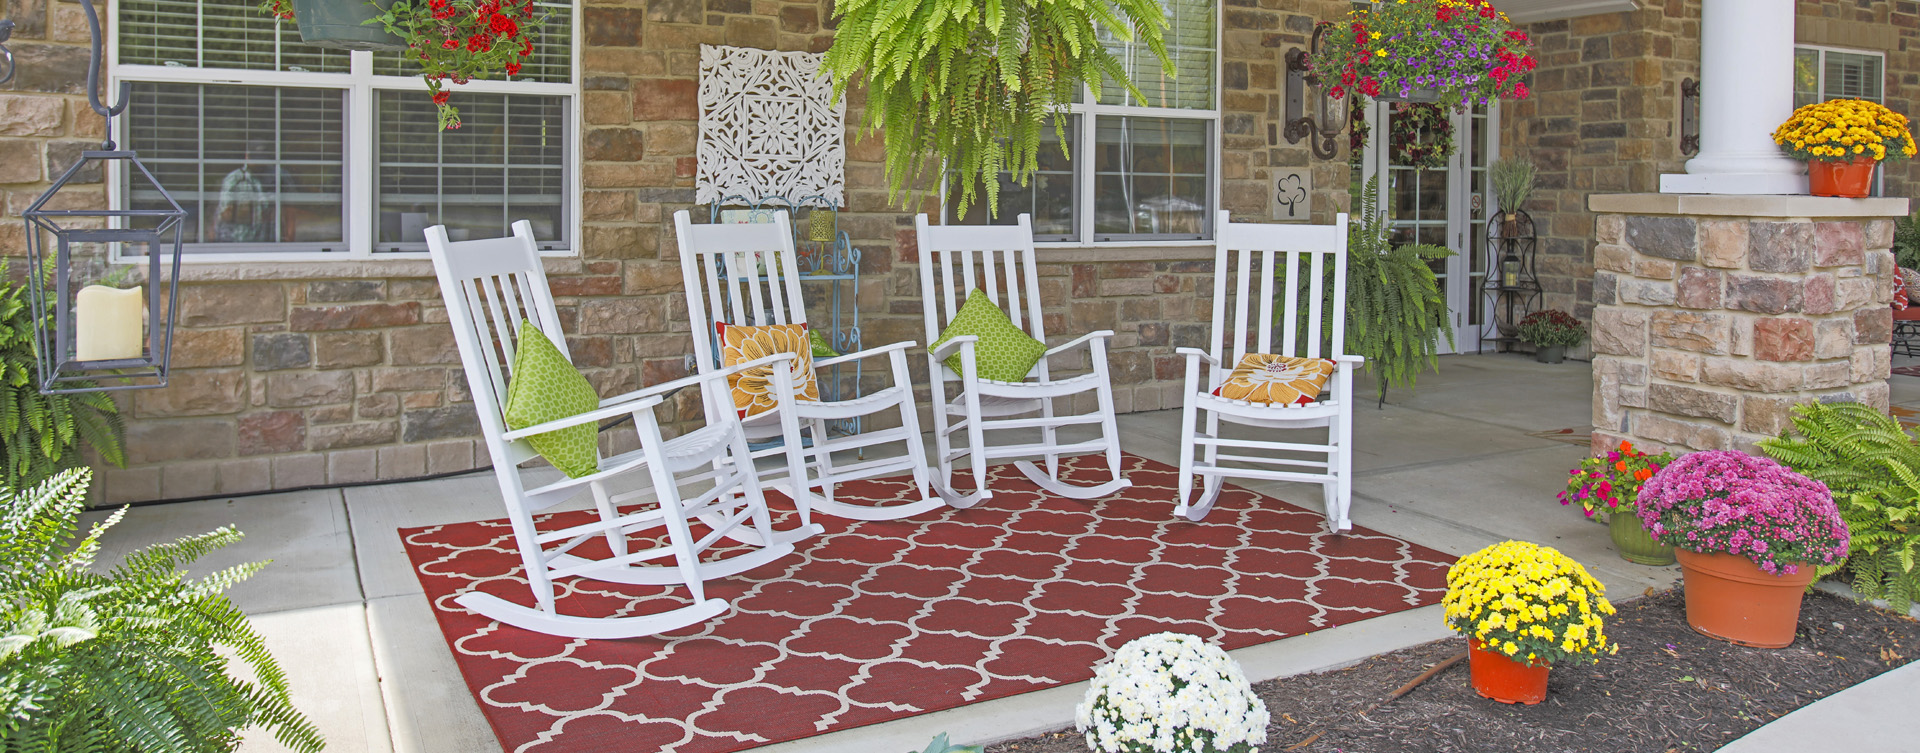 Sip on your favorite drink on the porch at Bickford of Carmel